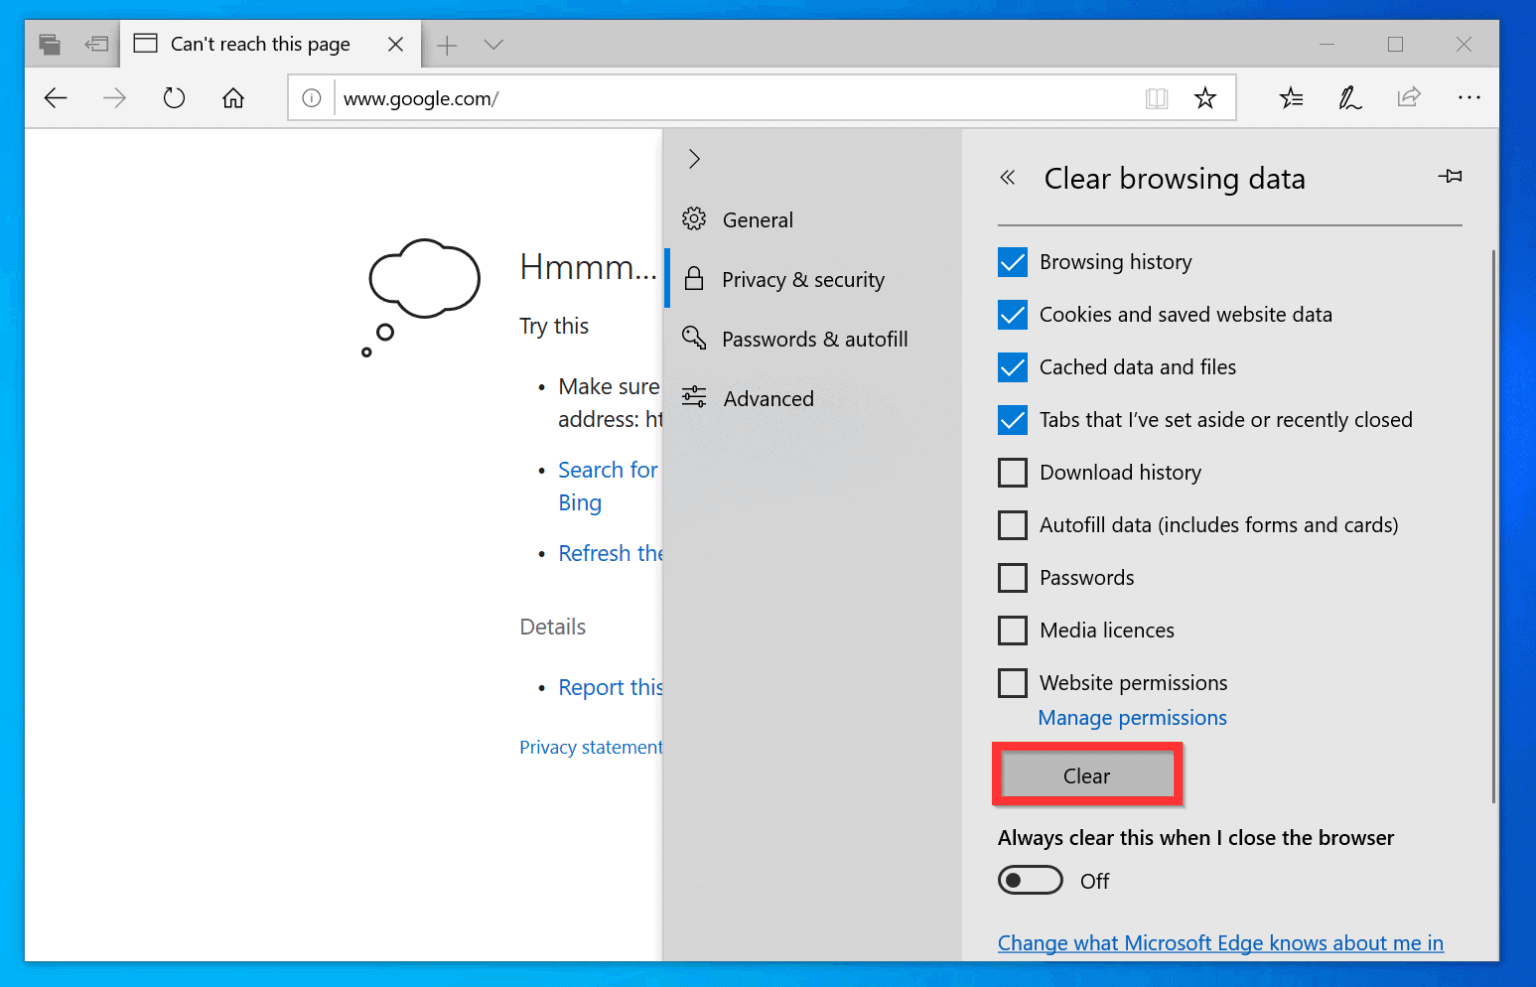 How to Clear Cache on Windows 10 (5 Methods) | Itechguides.com